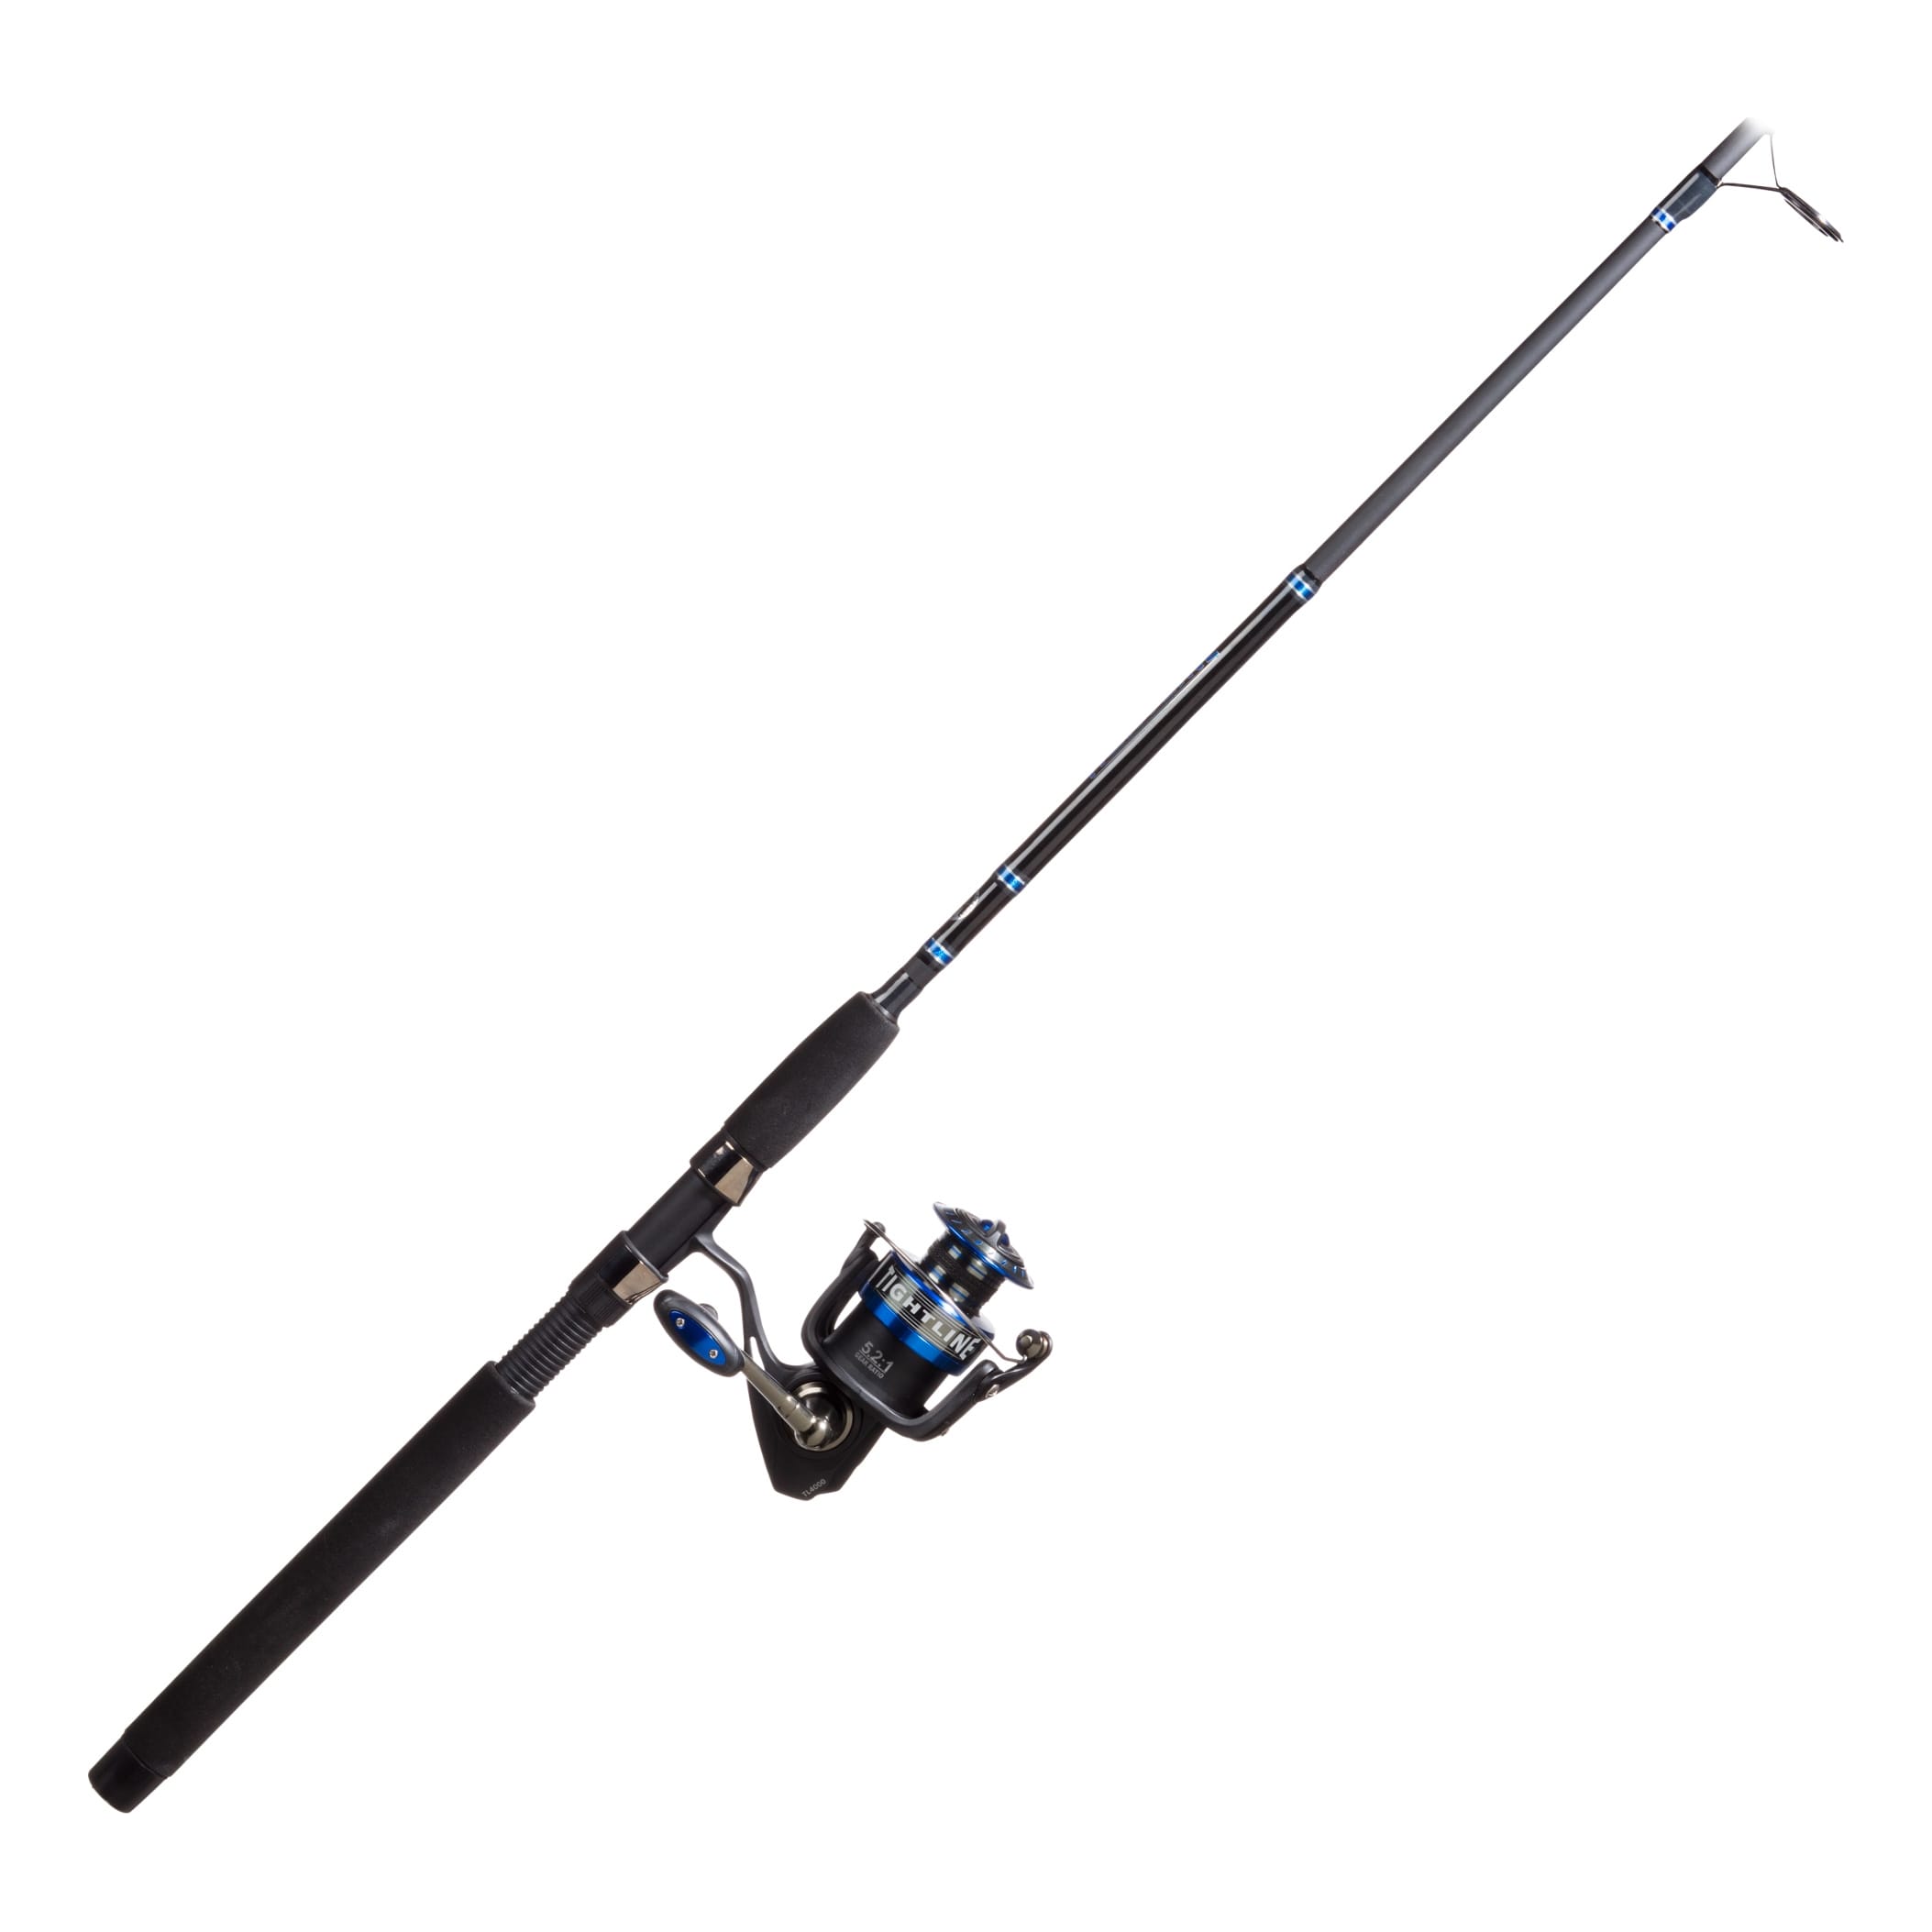 Abu Garcia 1524568 7-Ft Max Z Fishing Rod and Reel Spinning Combo